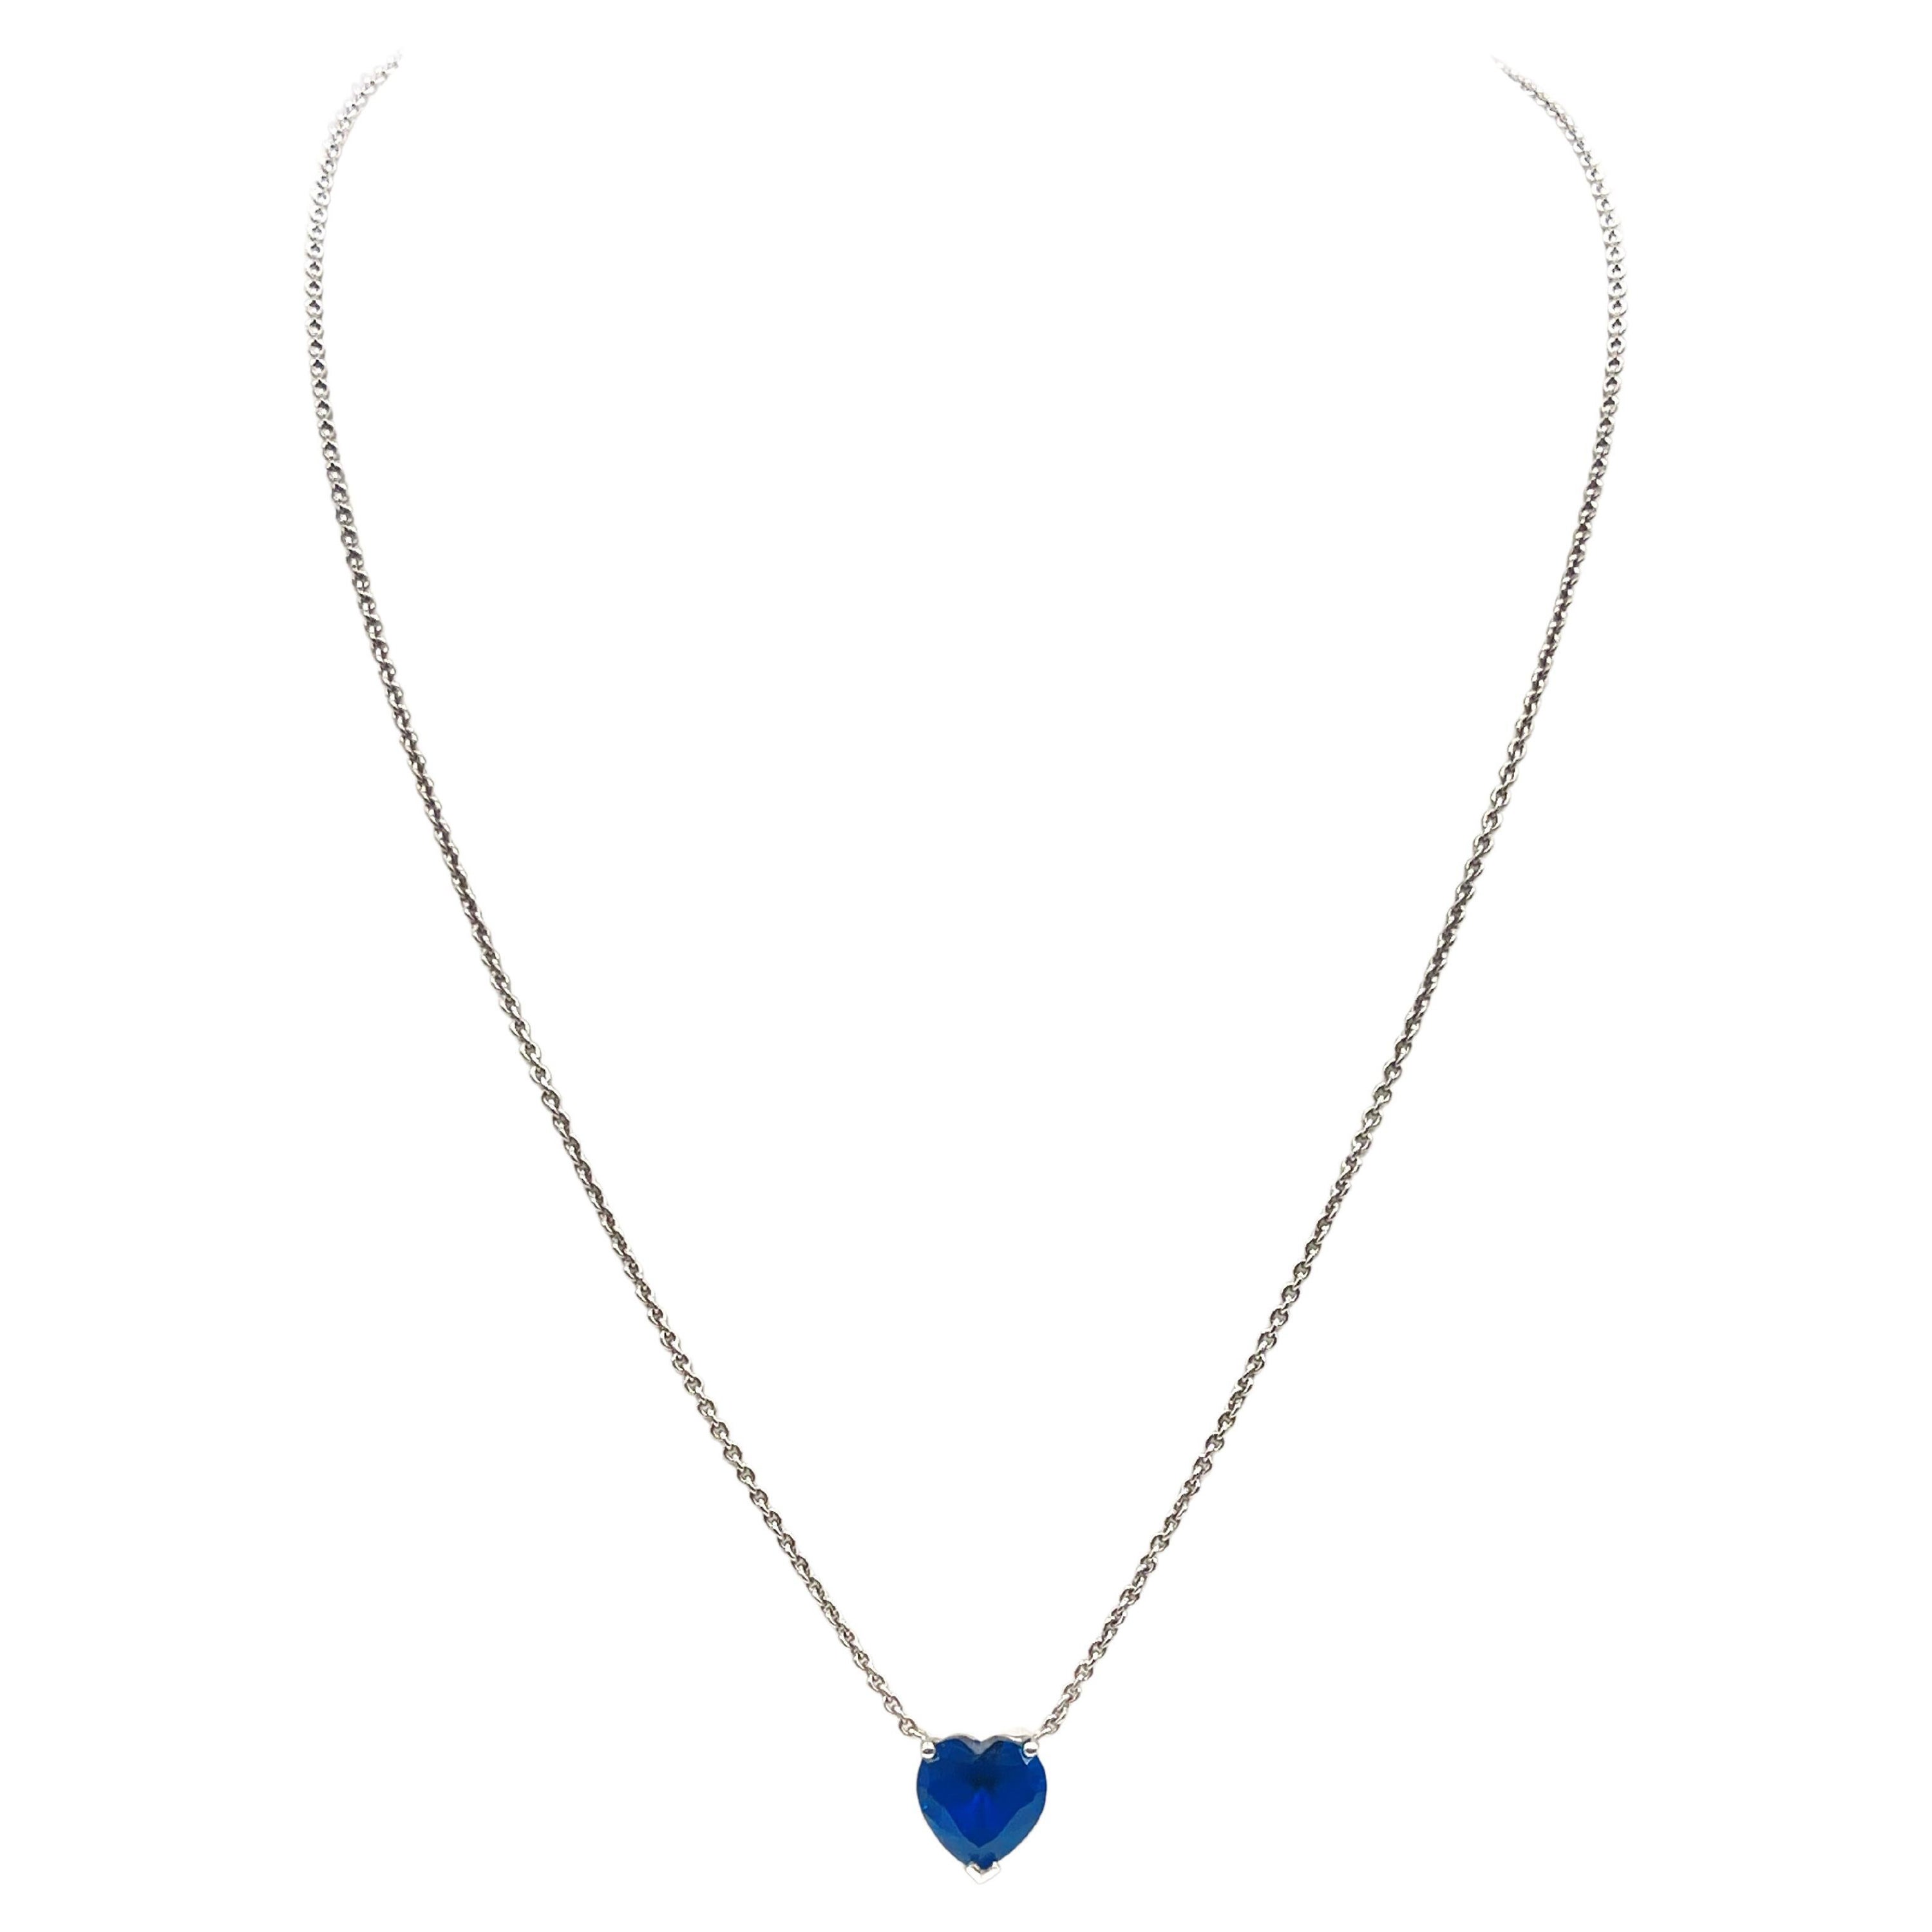 7 Carat Natural Heart Shape Sapphire Pendant Necklace in 14K White Gold